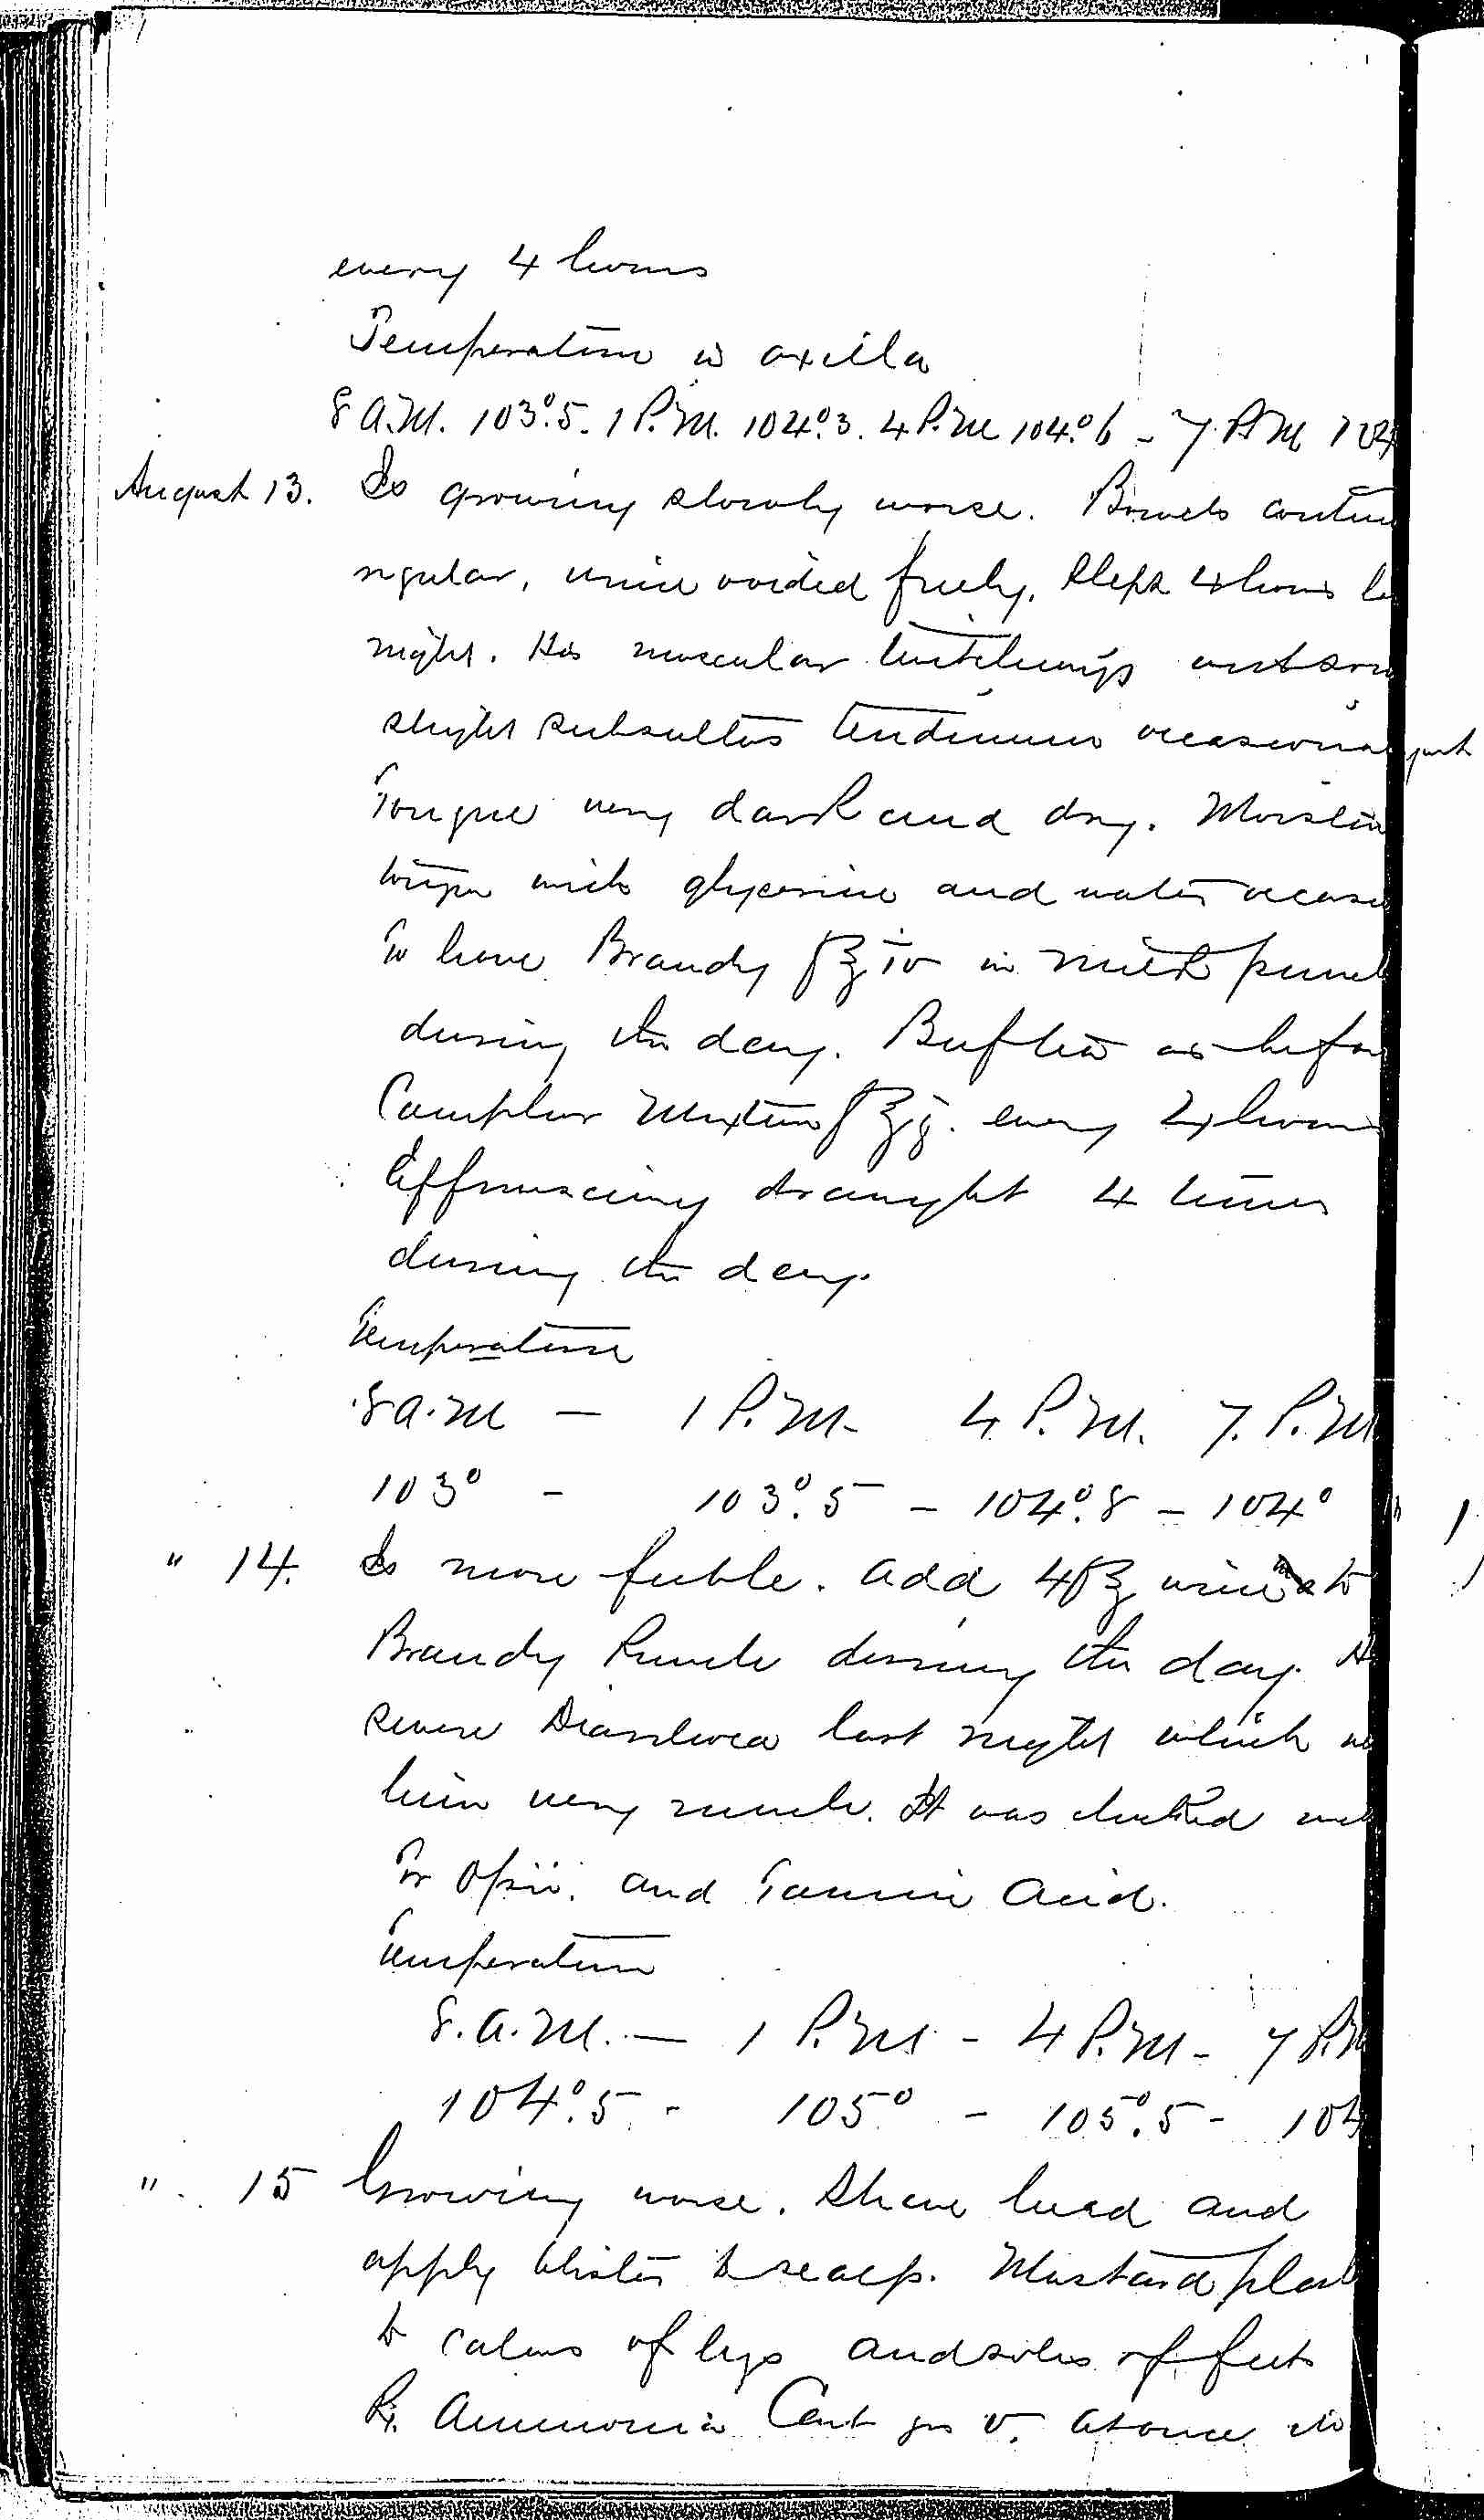 Entry for William Hack (page 6 of 7) in the log Hospital Tickets and Case Papers - Naval Hospital - Washington, D.C. - 1868-69